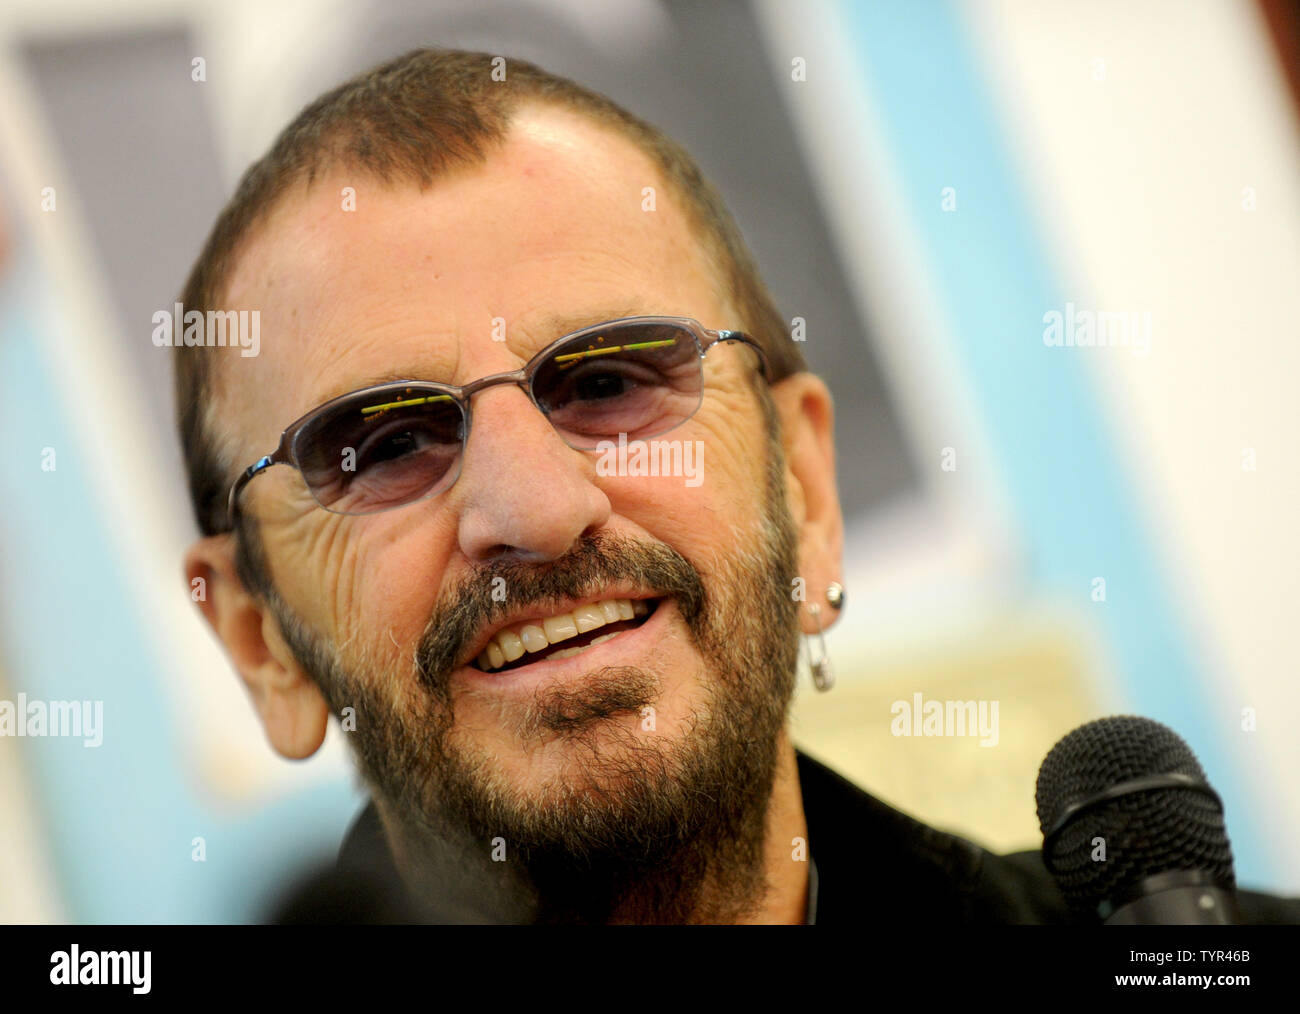 Ringo Starr looks back with Photograph, a collection of pictures he's taken throughout his long career in the Beatles and after at the Strand Book Store on October 26, 2015 in New York City.     Photo by Dennis Van Tine/UPI Stock Photo